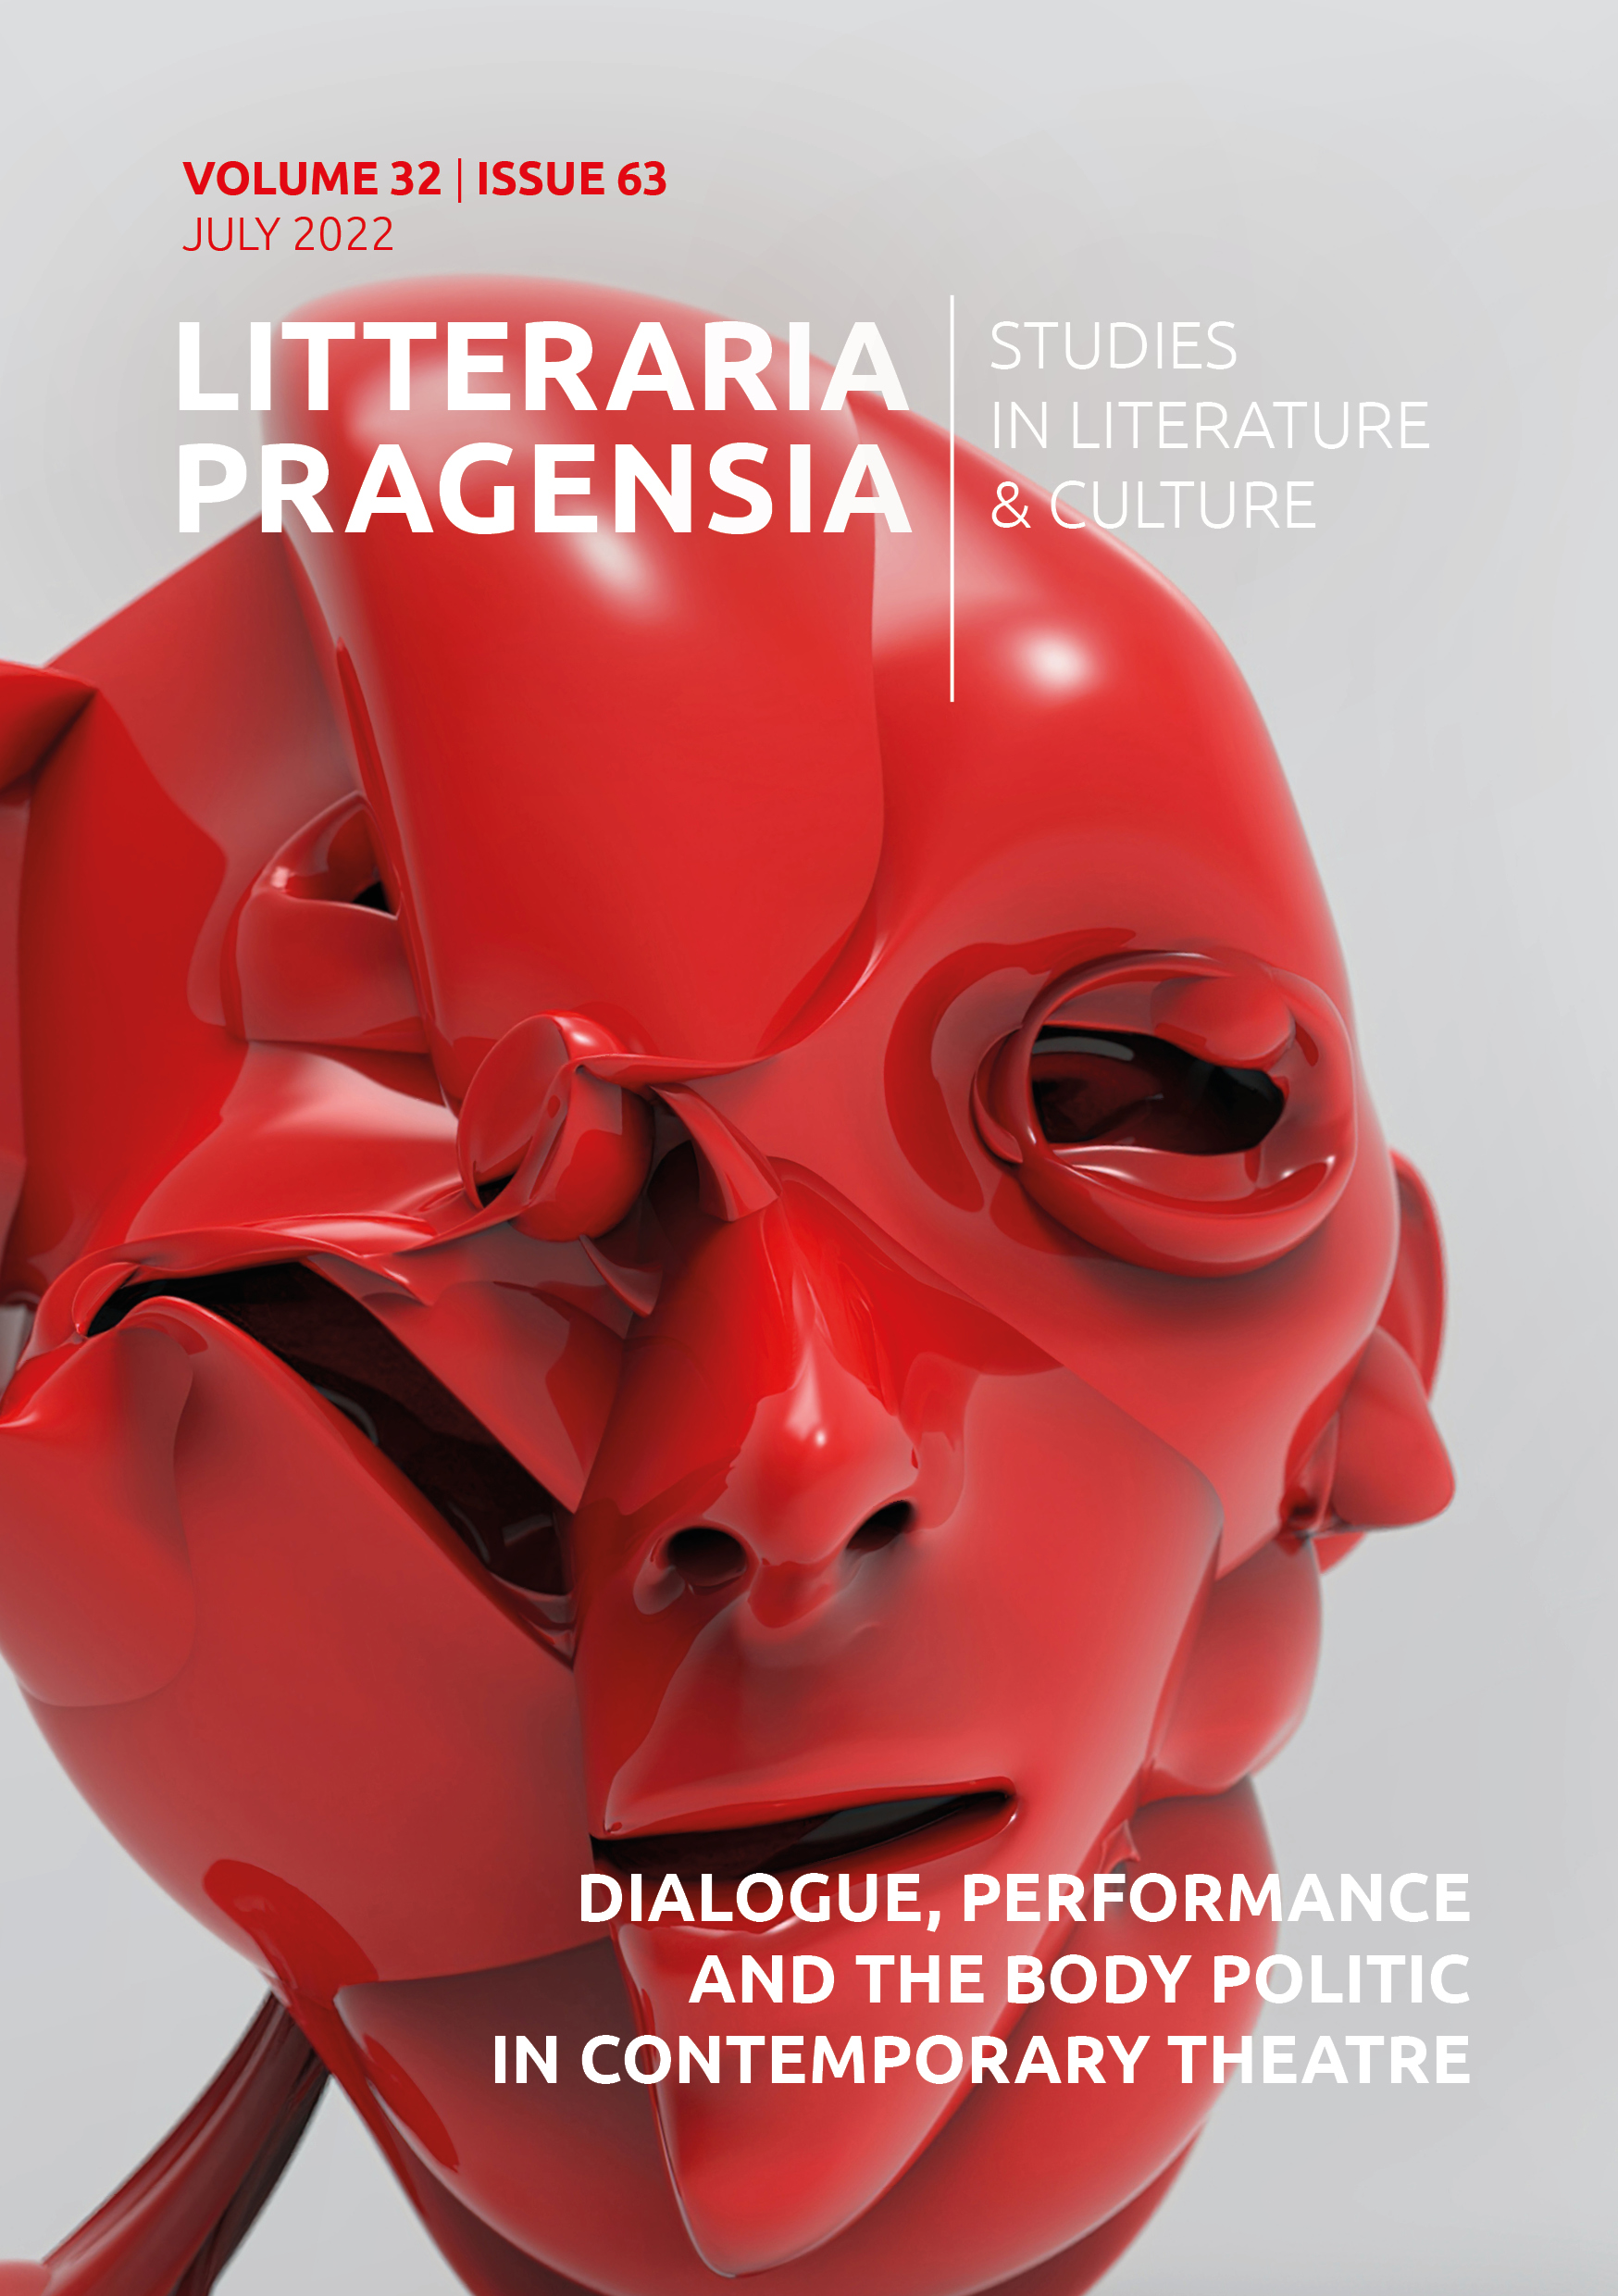 Introduction: Dialogue, Performance and the Body Politic in Contemporary Theatre